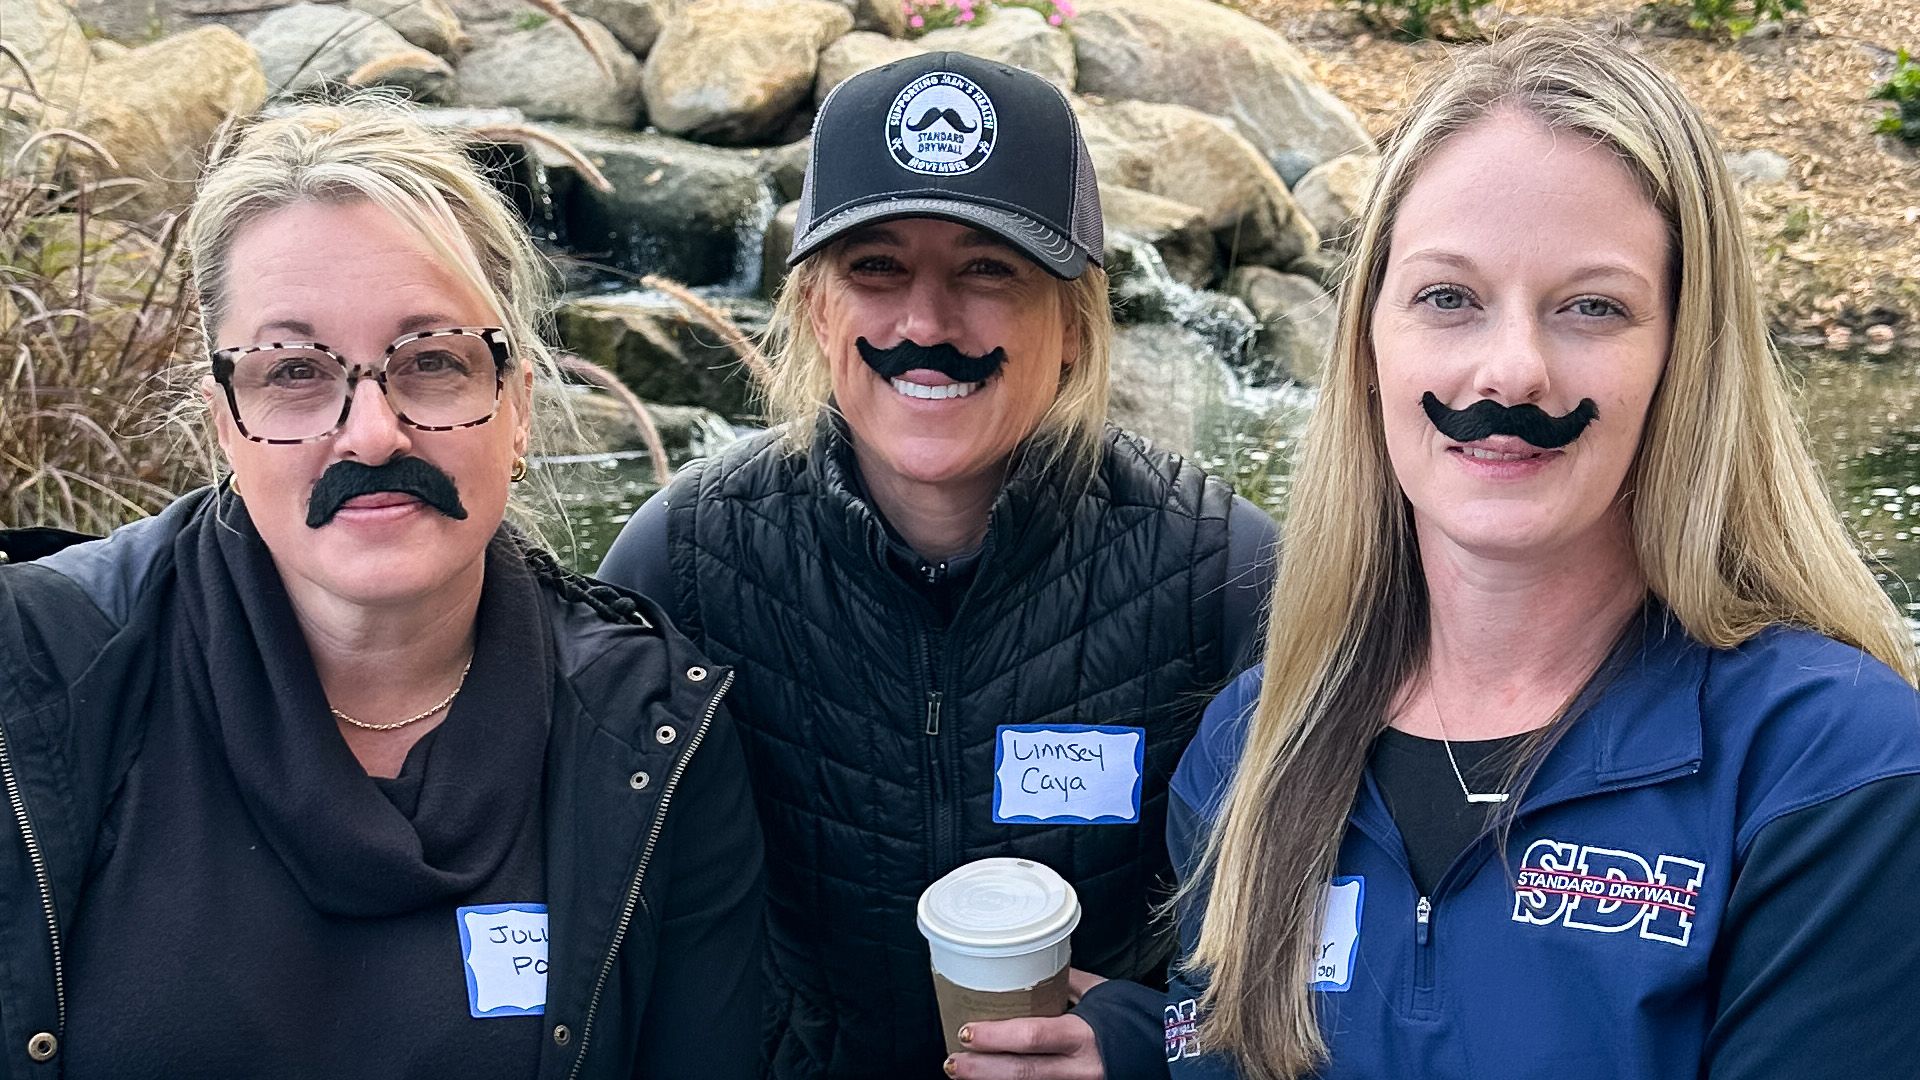 Three women smile together, each is wearing a funny stick-on moustache